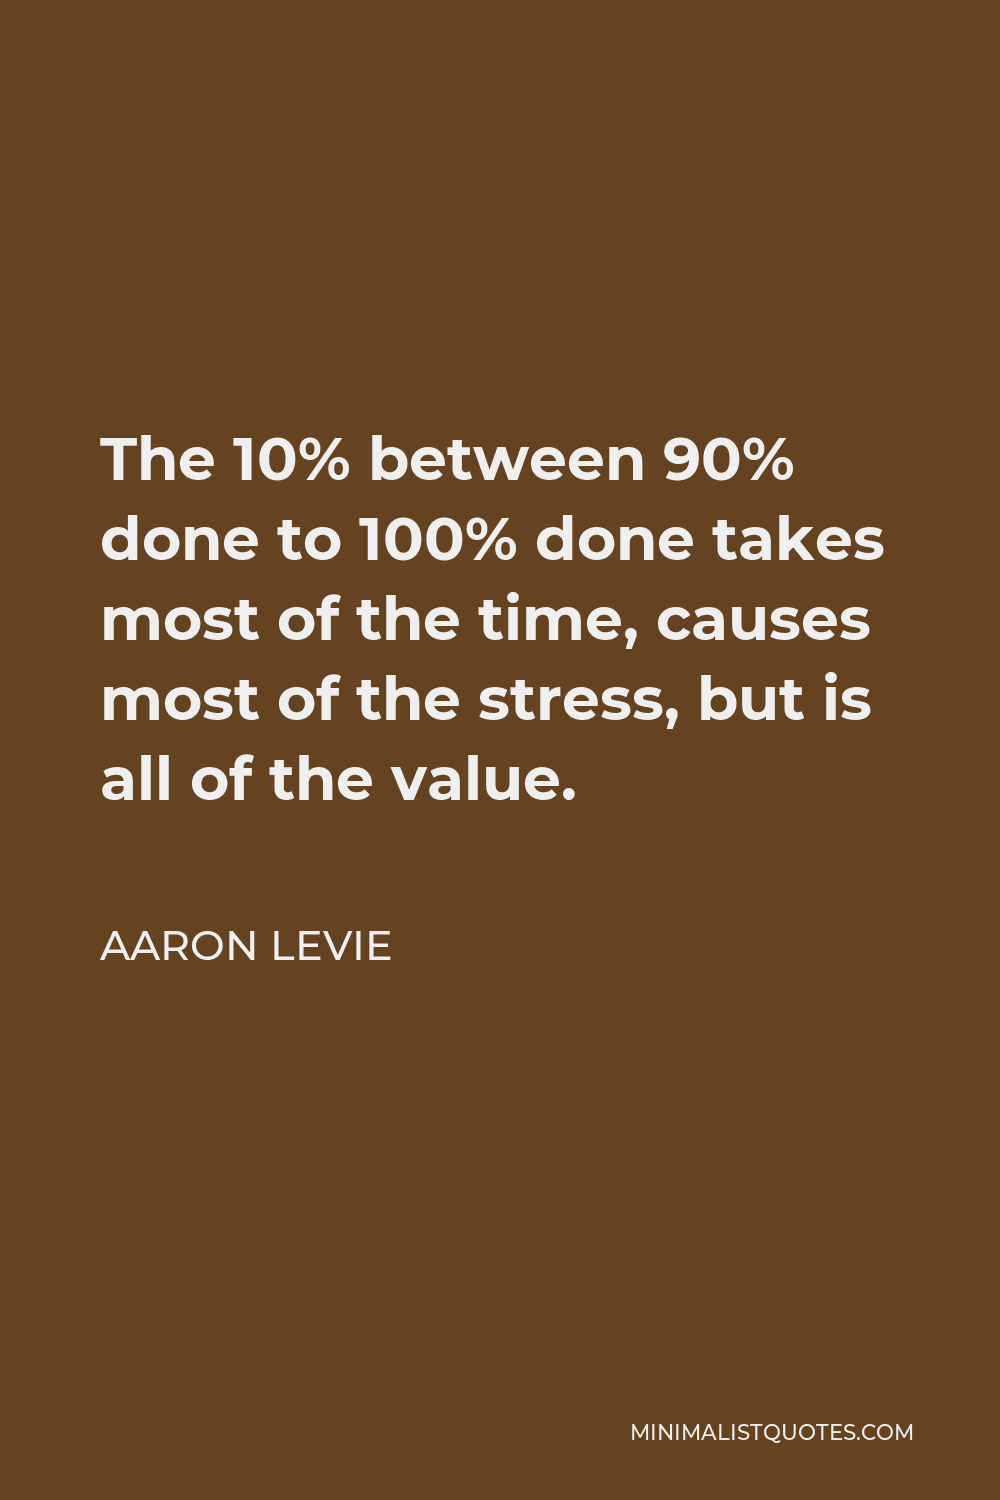 Aaron Levie Quote - The 10% between 90% done to 100% done takes most of the time, causes most of the stress, but is all of the value.